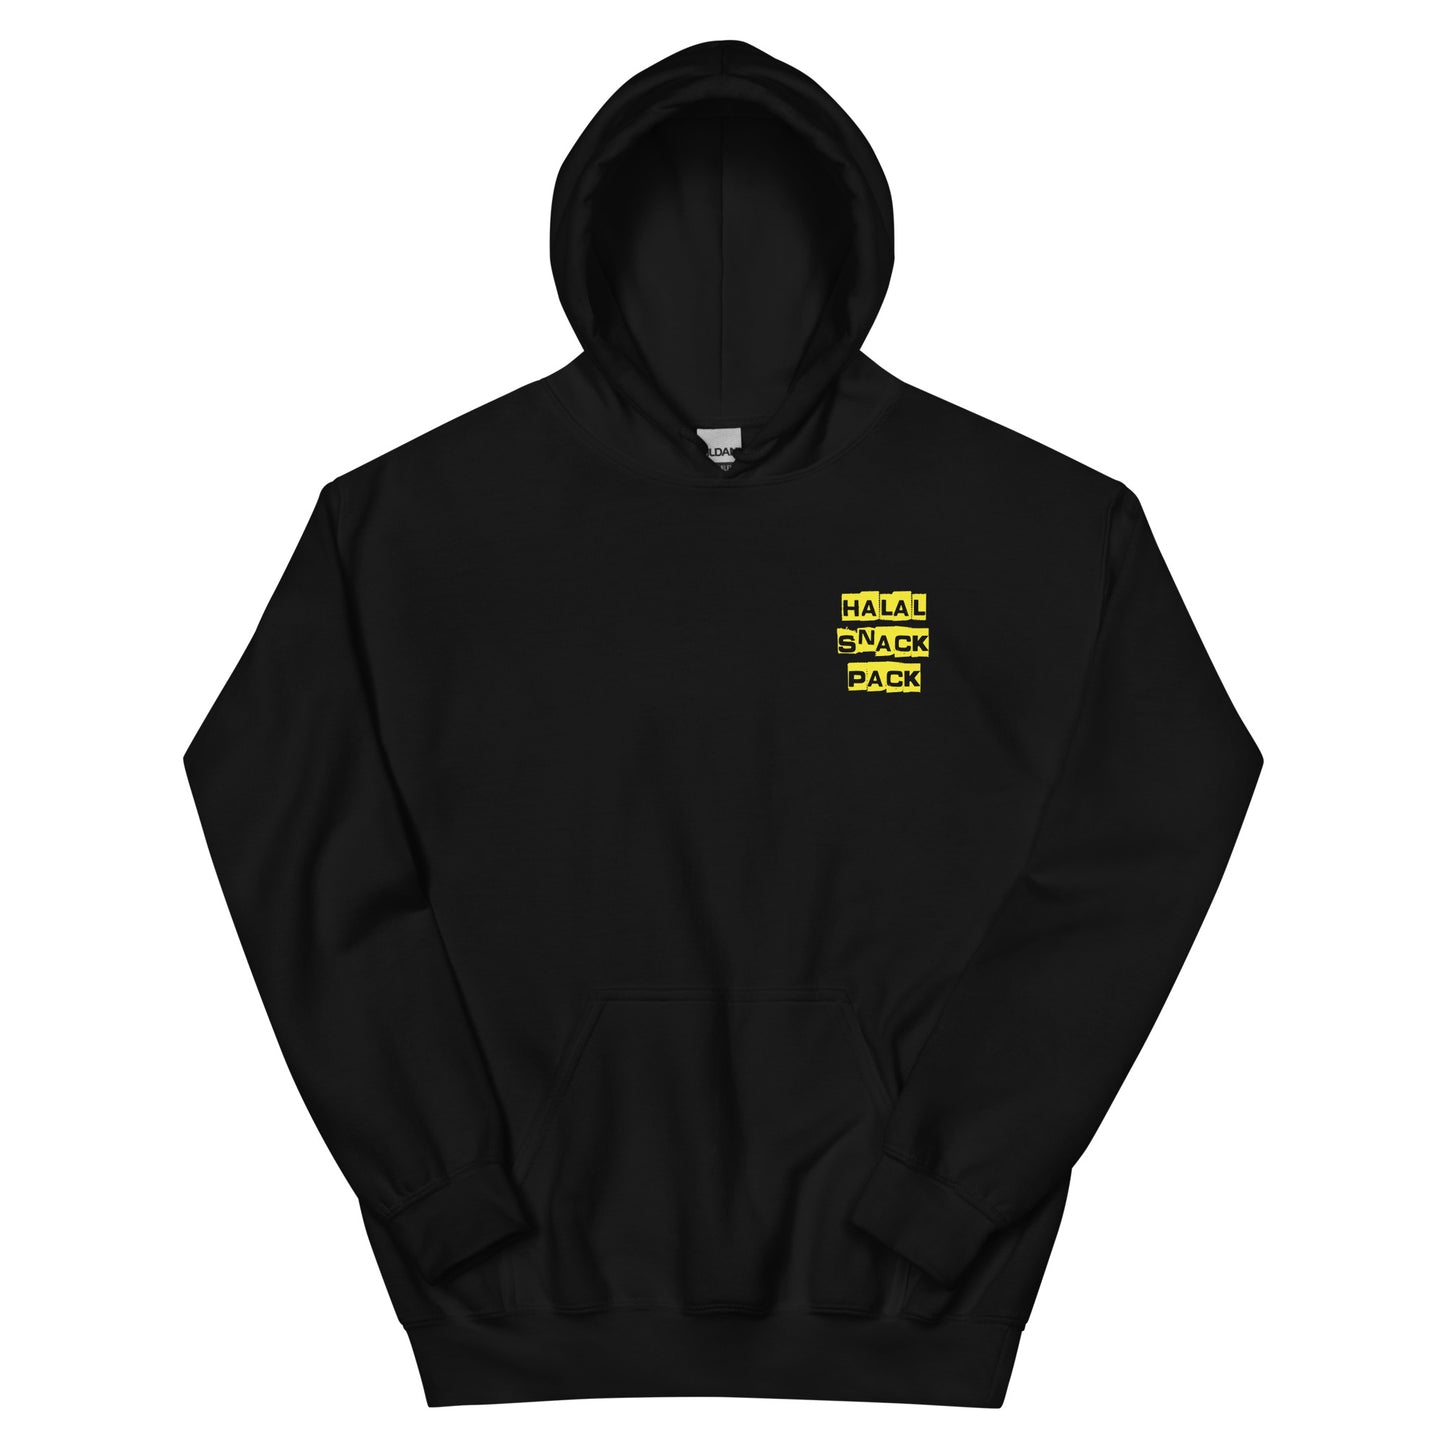 Halal Snack Pack - Sustainably Made Hoodie